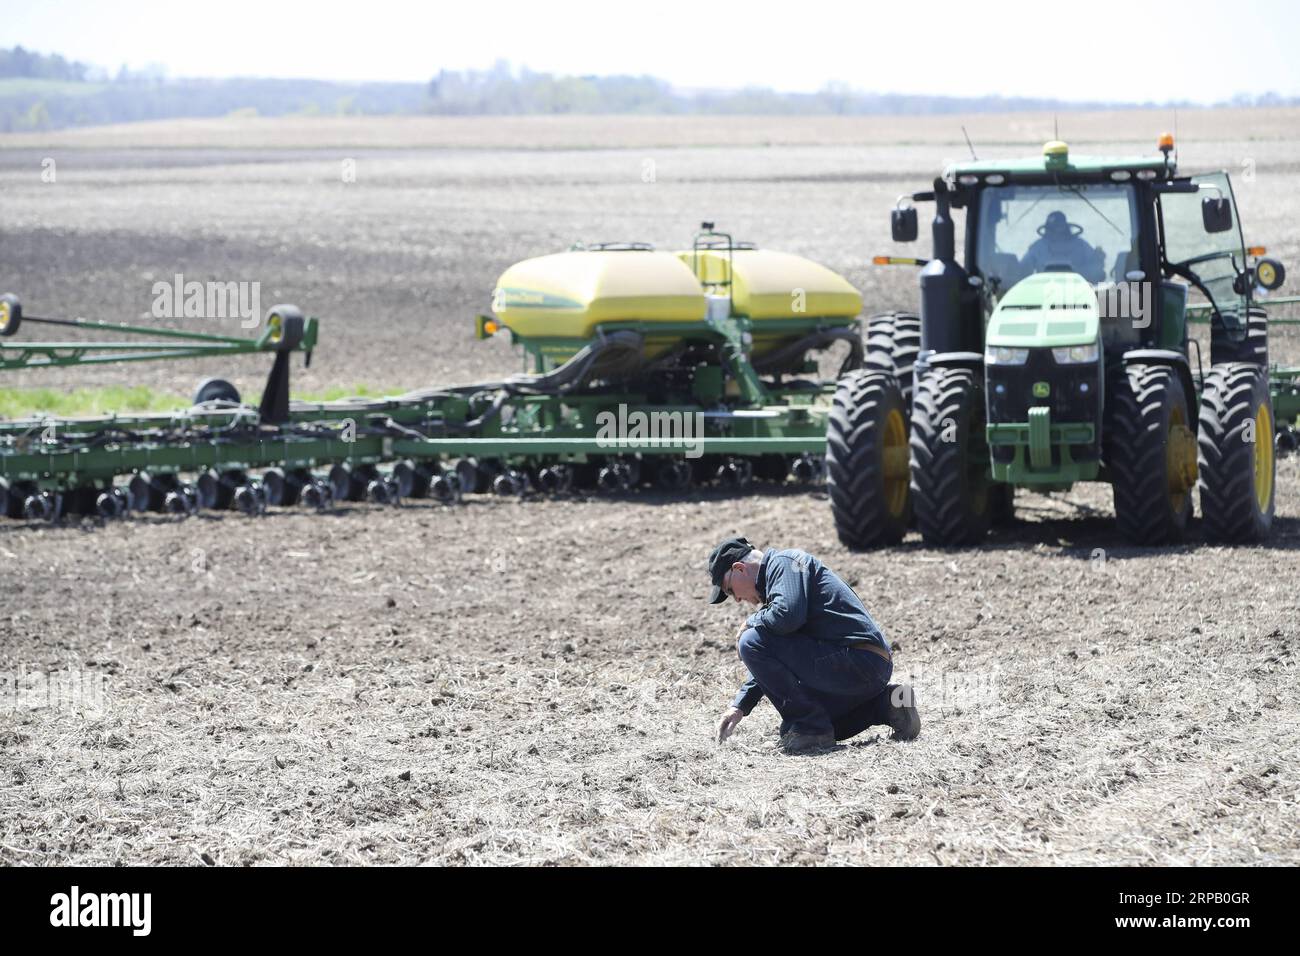 (190523) -- IOWA, May 23, 2019 (Xinhua) -- Bill Pellett examines the depth of the seeds after his son Bret plants corn with a planter machine at their family farm in Atlantic of Cass county, Iowa, the United States, April 24, 2019. Bill Pellett knows how to farm, but just like most of his peers across the country, the 71-year-old farmer is feeling less assured of what he could get from a new year of farming, as there appears to be no quick resolution of the year-long trade disputes between the United States and China. TO GO WITH Spotlight: Leading U.S. farming state enters new crop season amid Stock Photo